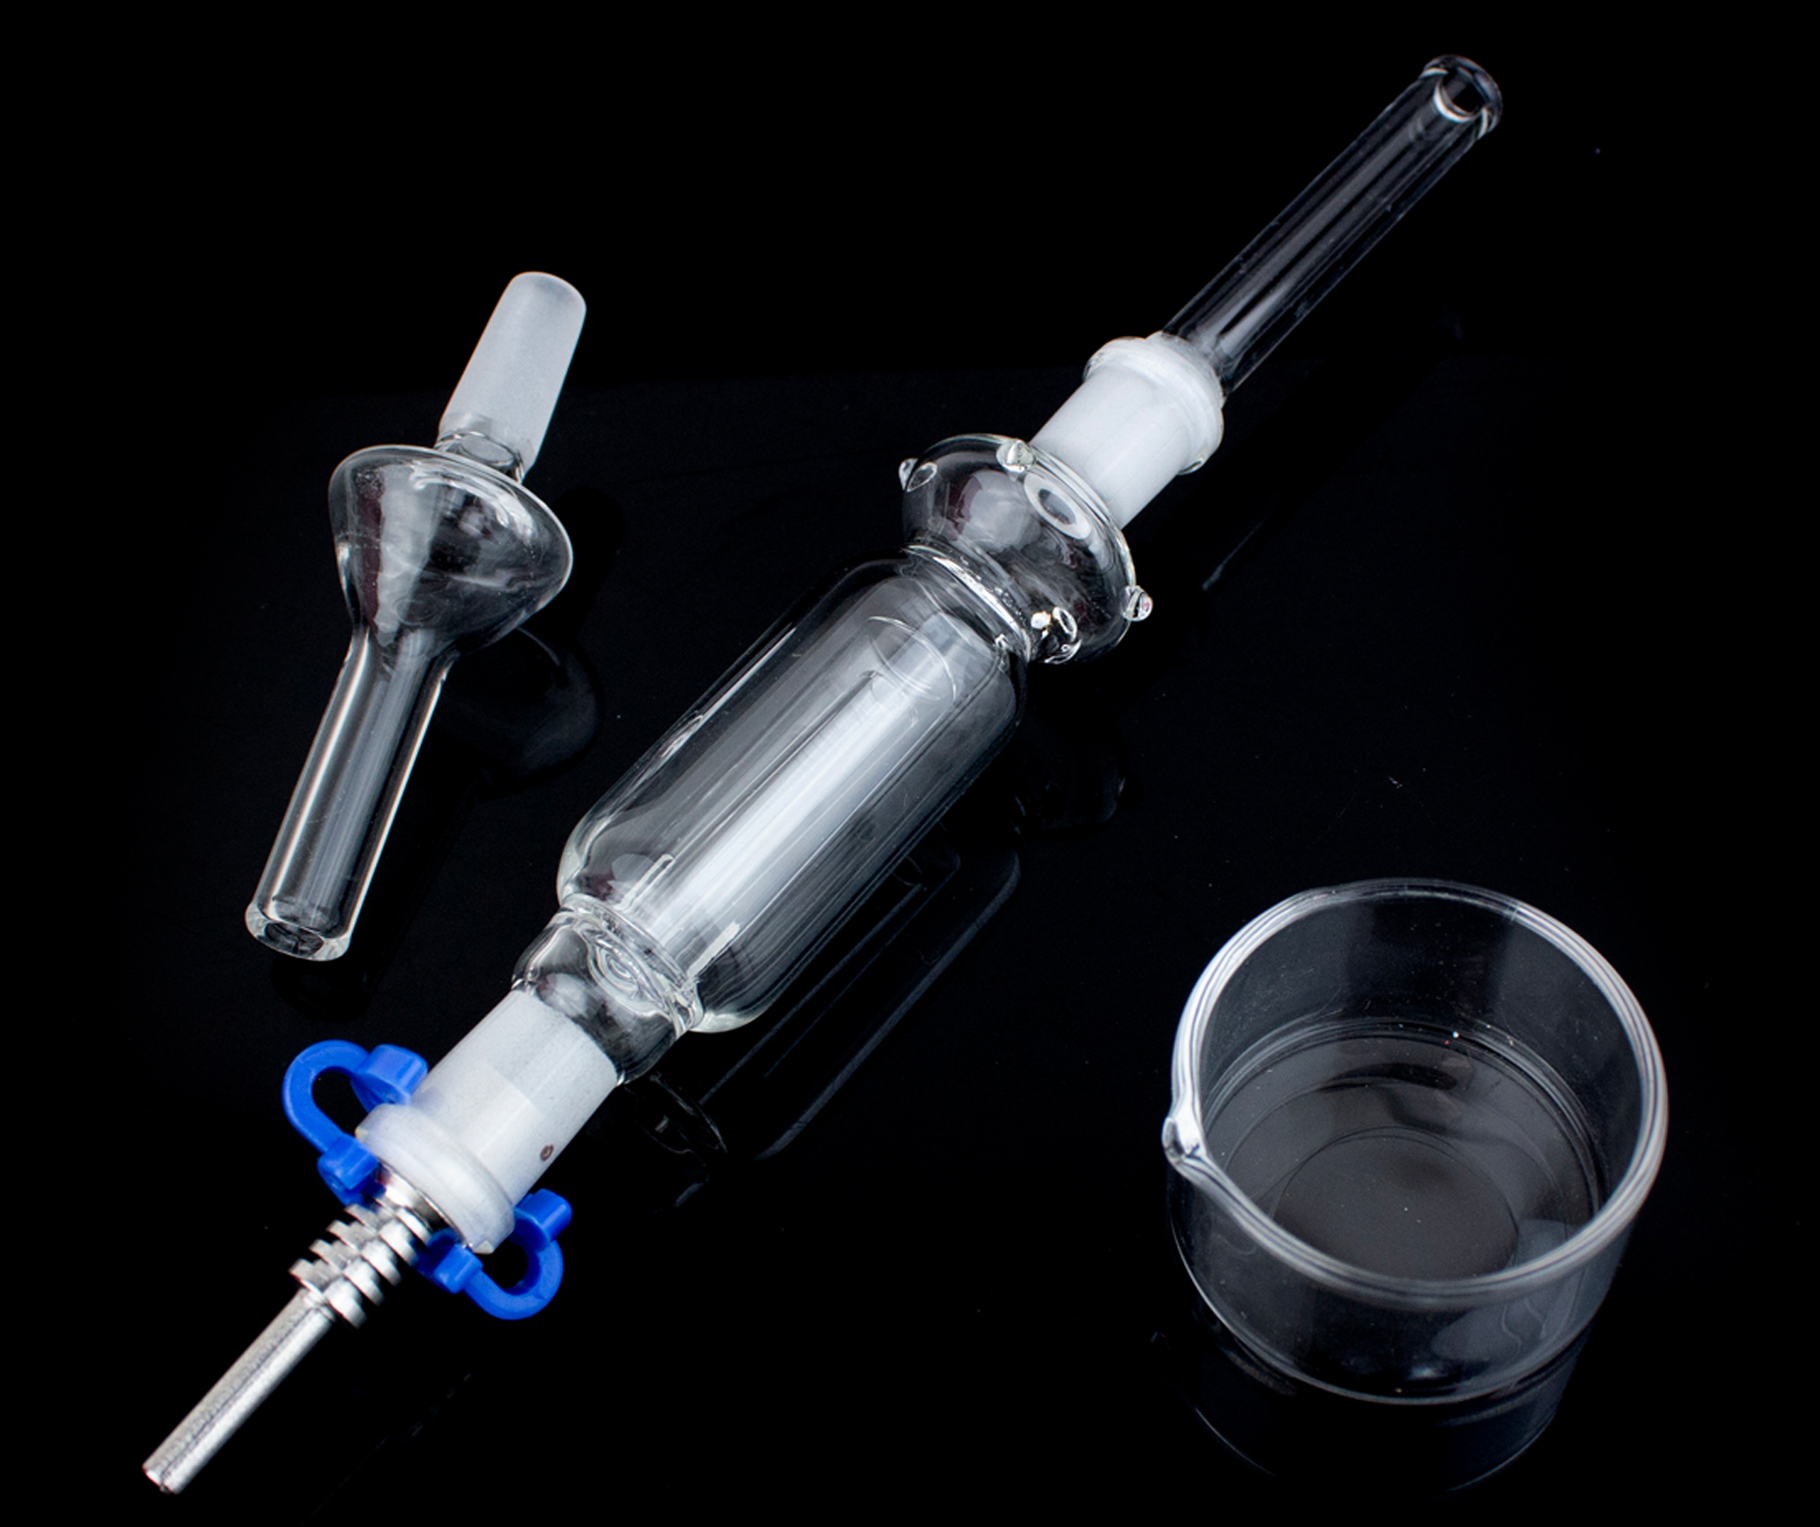 Nectar Collectors: Portable Dab Rig with a Straw